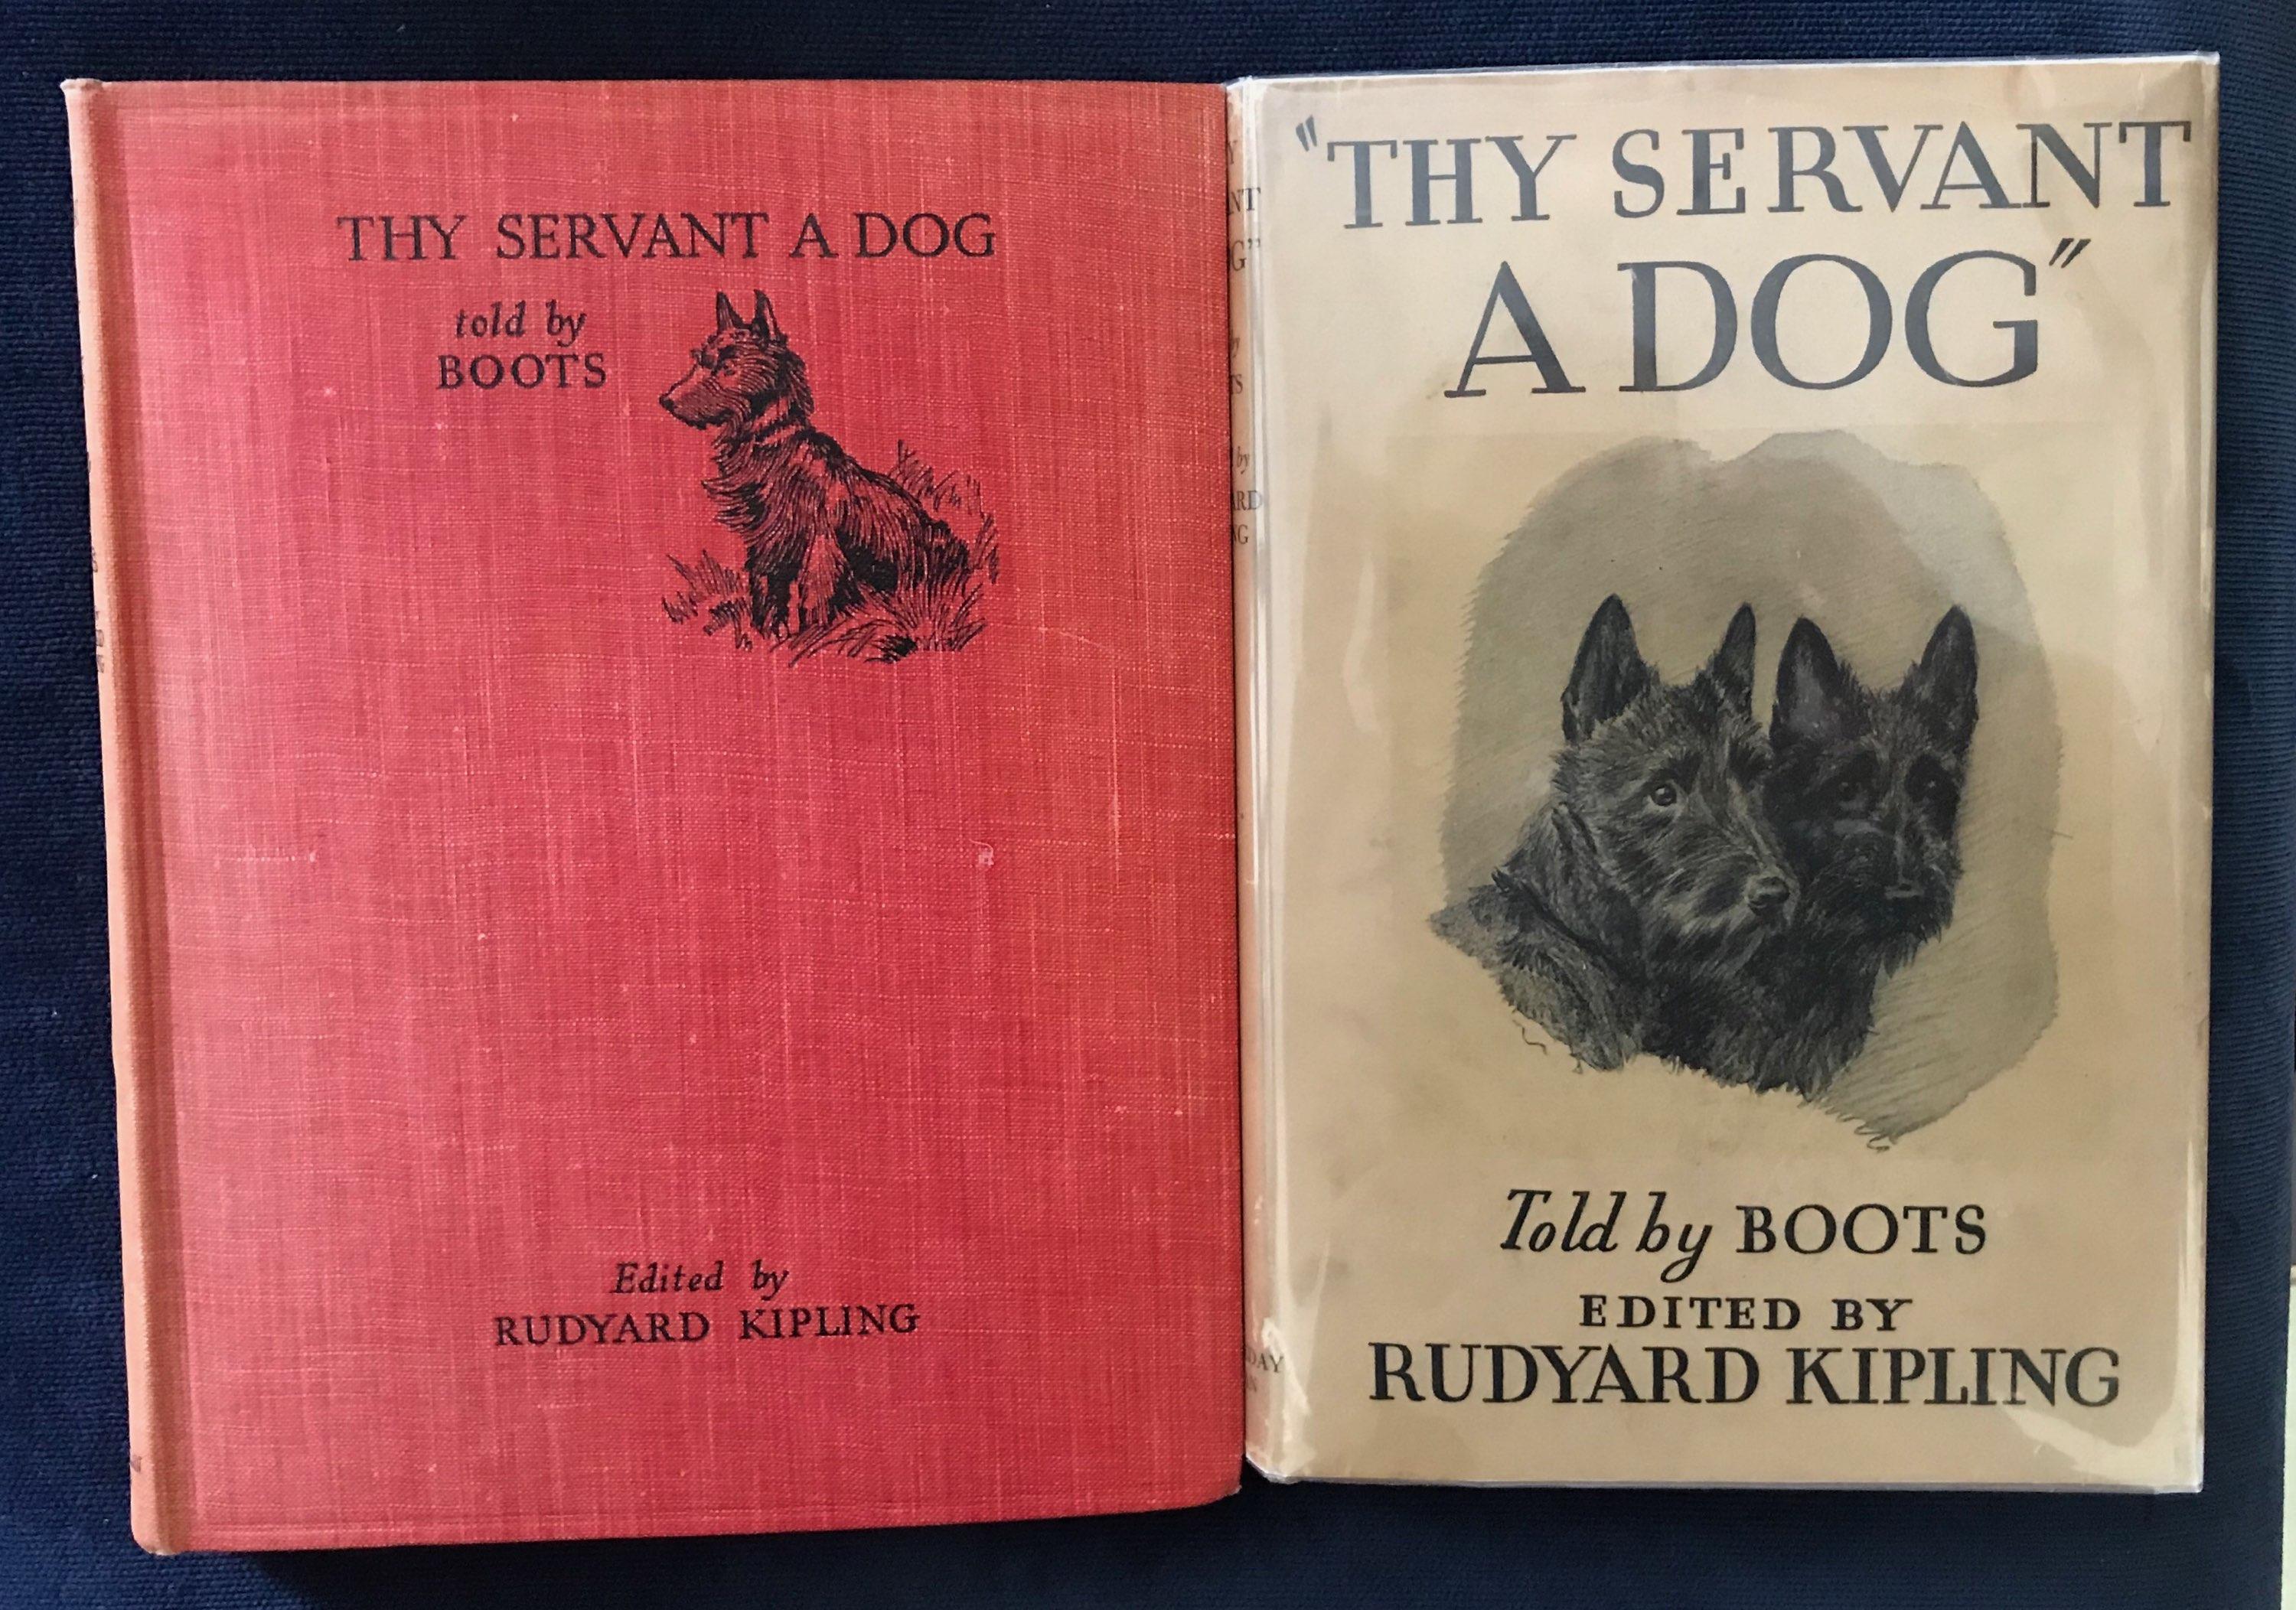 A colorful contemporary dog painting of Scottish Terrier dogs with accompanying text from a book is an inspirational departure from the traditional illustrations found in British Rudyard Kipling's 